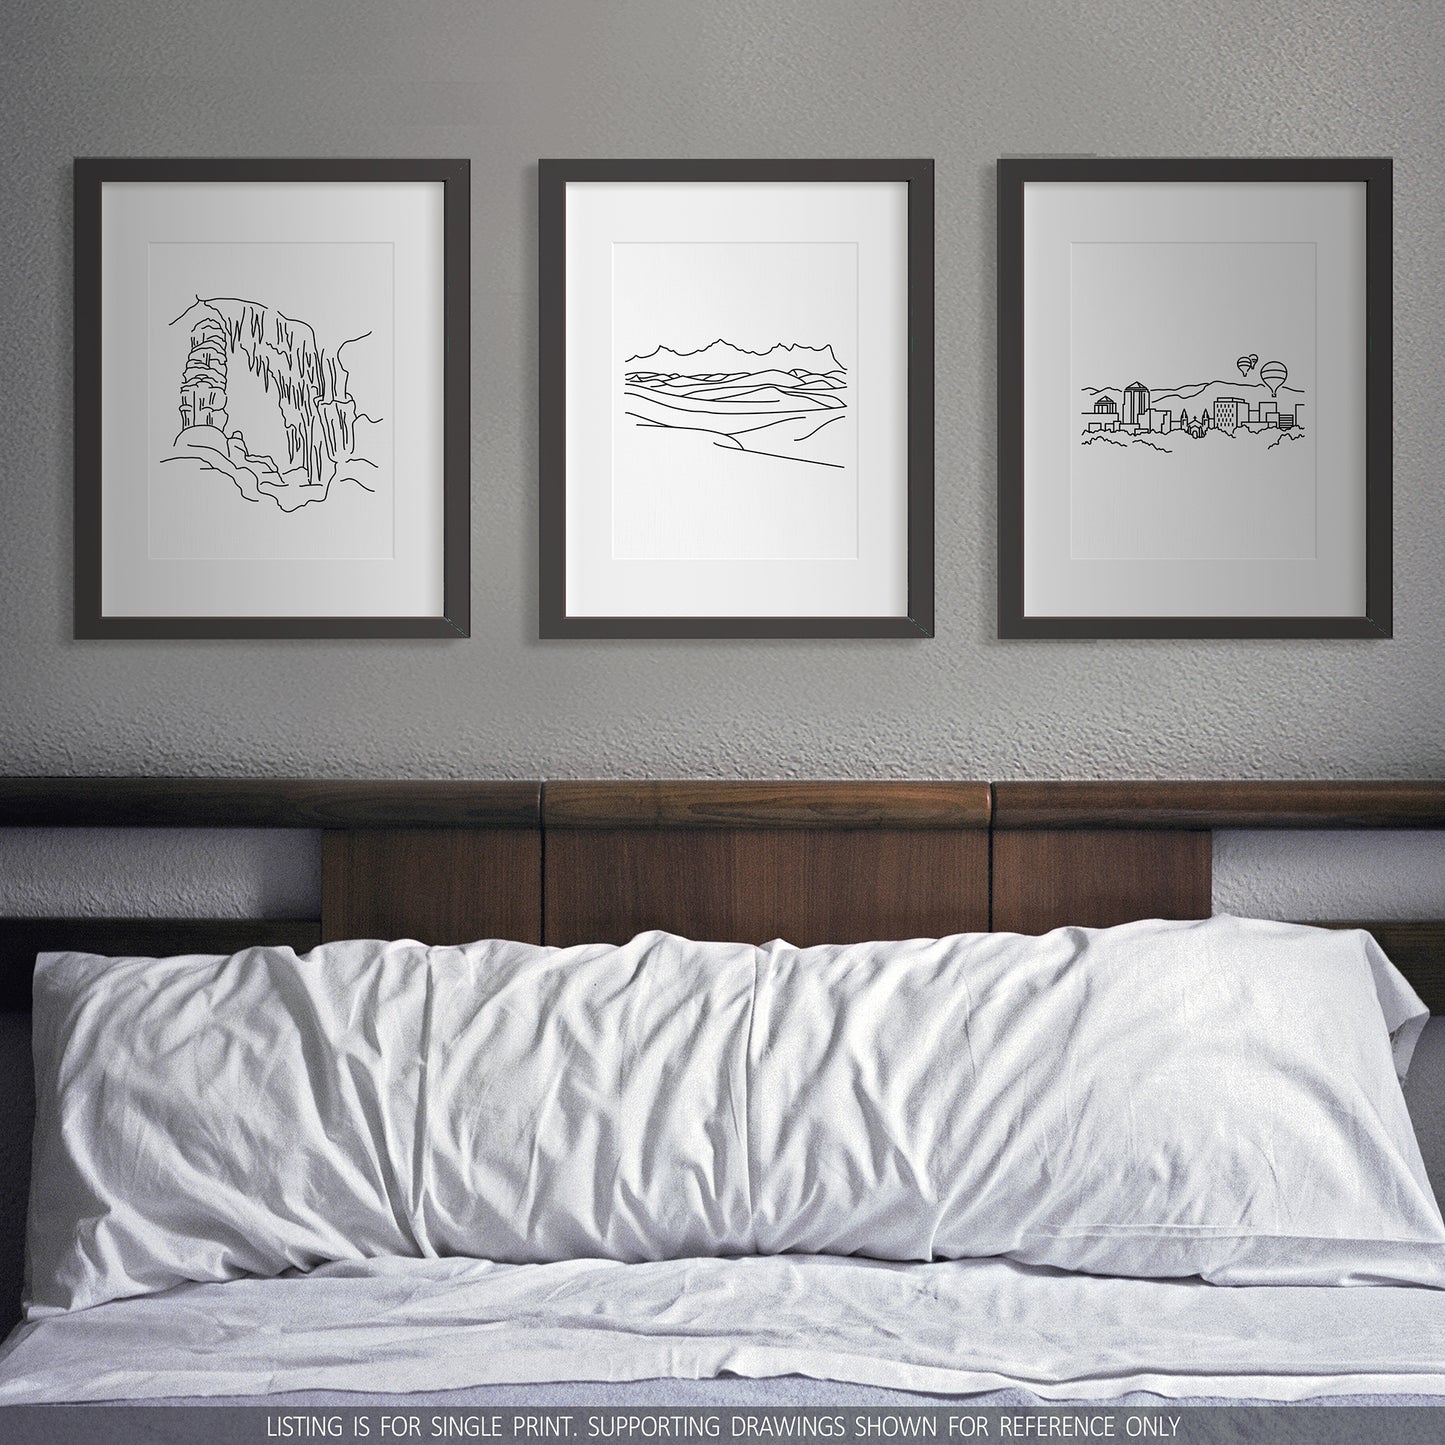 A group of three framed drawings on a wall above a bed. The line art drawings include Carlsbad Caverns National Park, White Sands National Park, and the Albuquerque Skyline